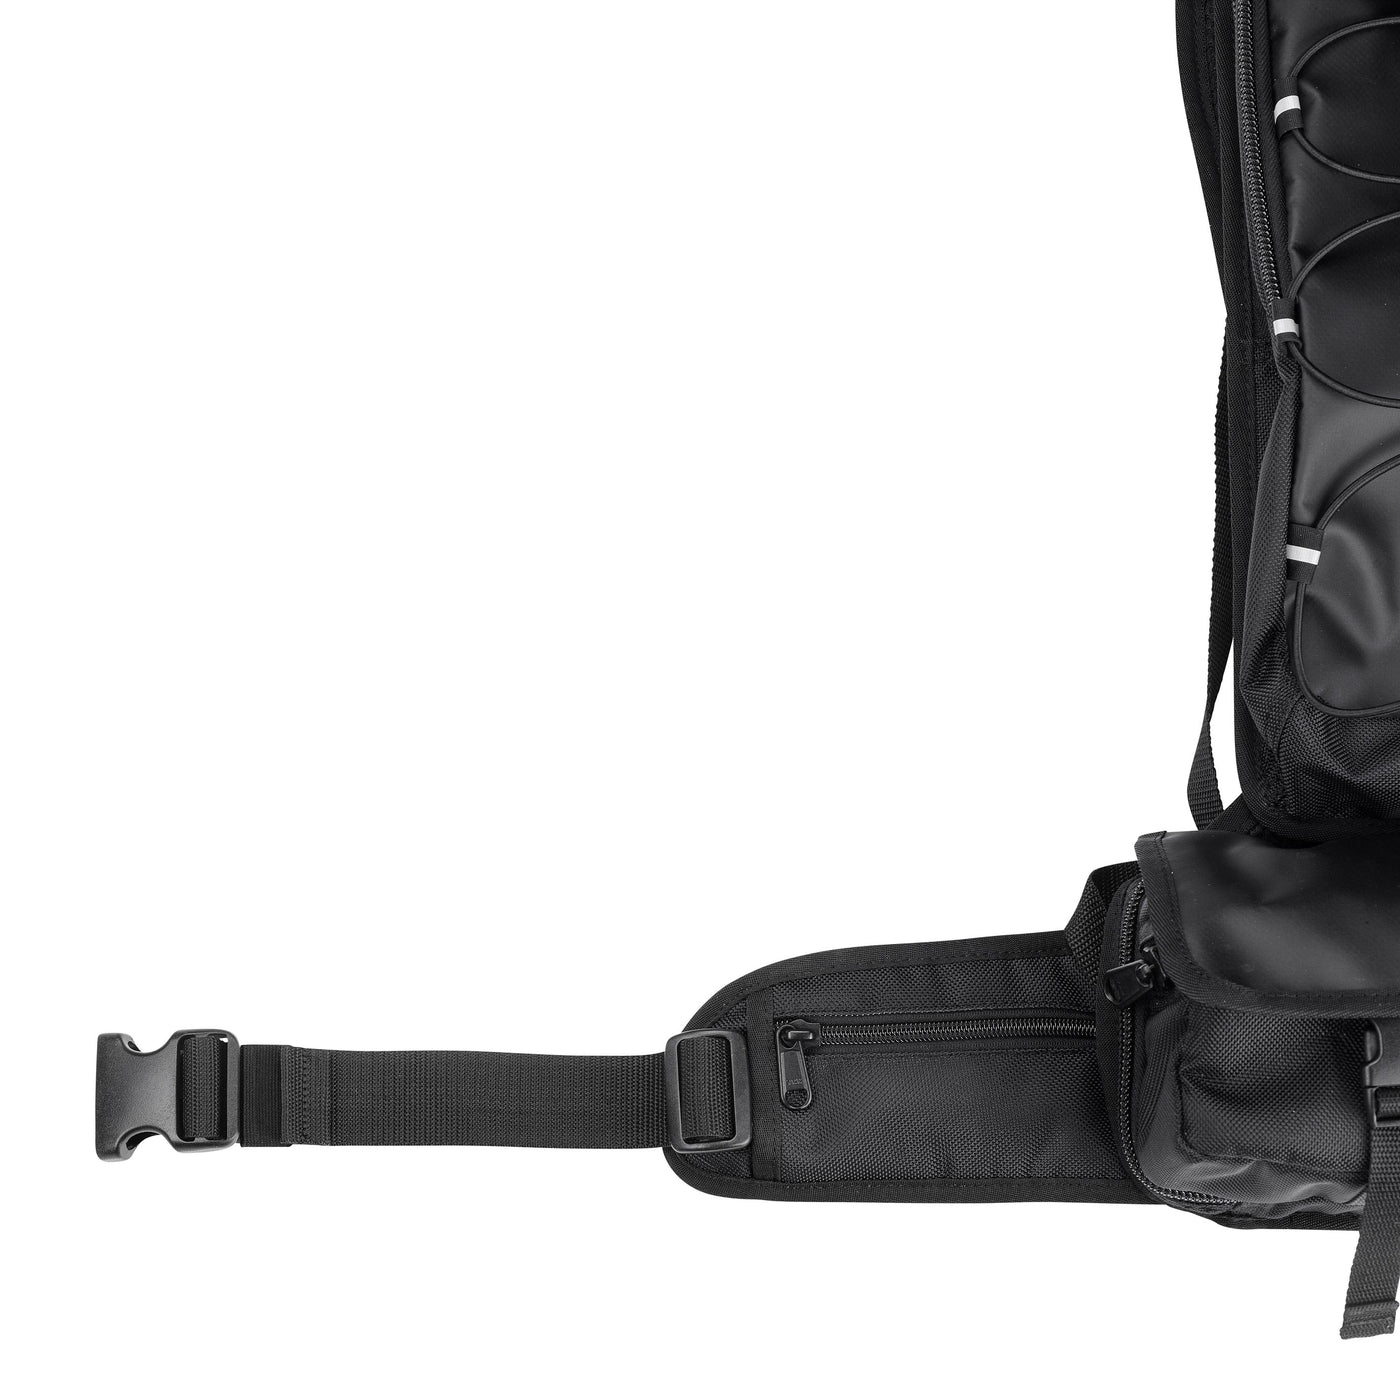 Clydesdale Gear Enduro Pack - view of the waist strap at a short length with the excess length tucked into the pocket for a clean look and so it doesn’t flap around.